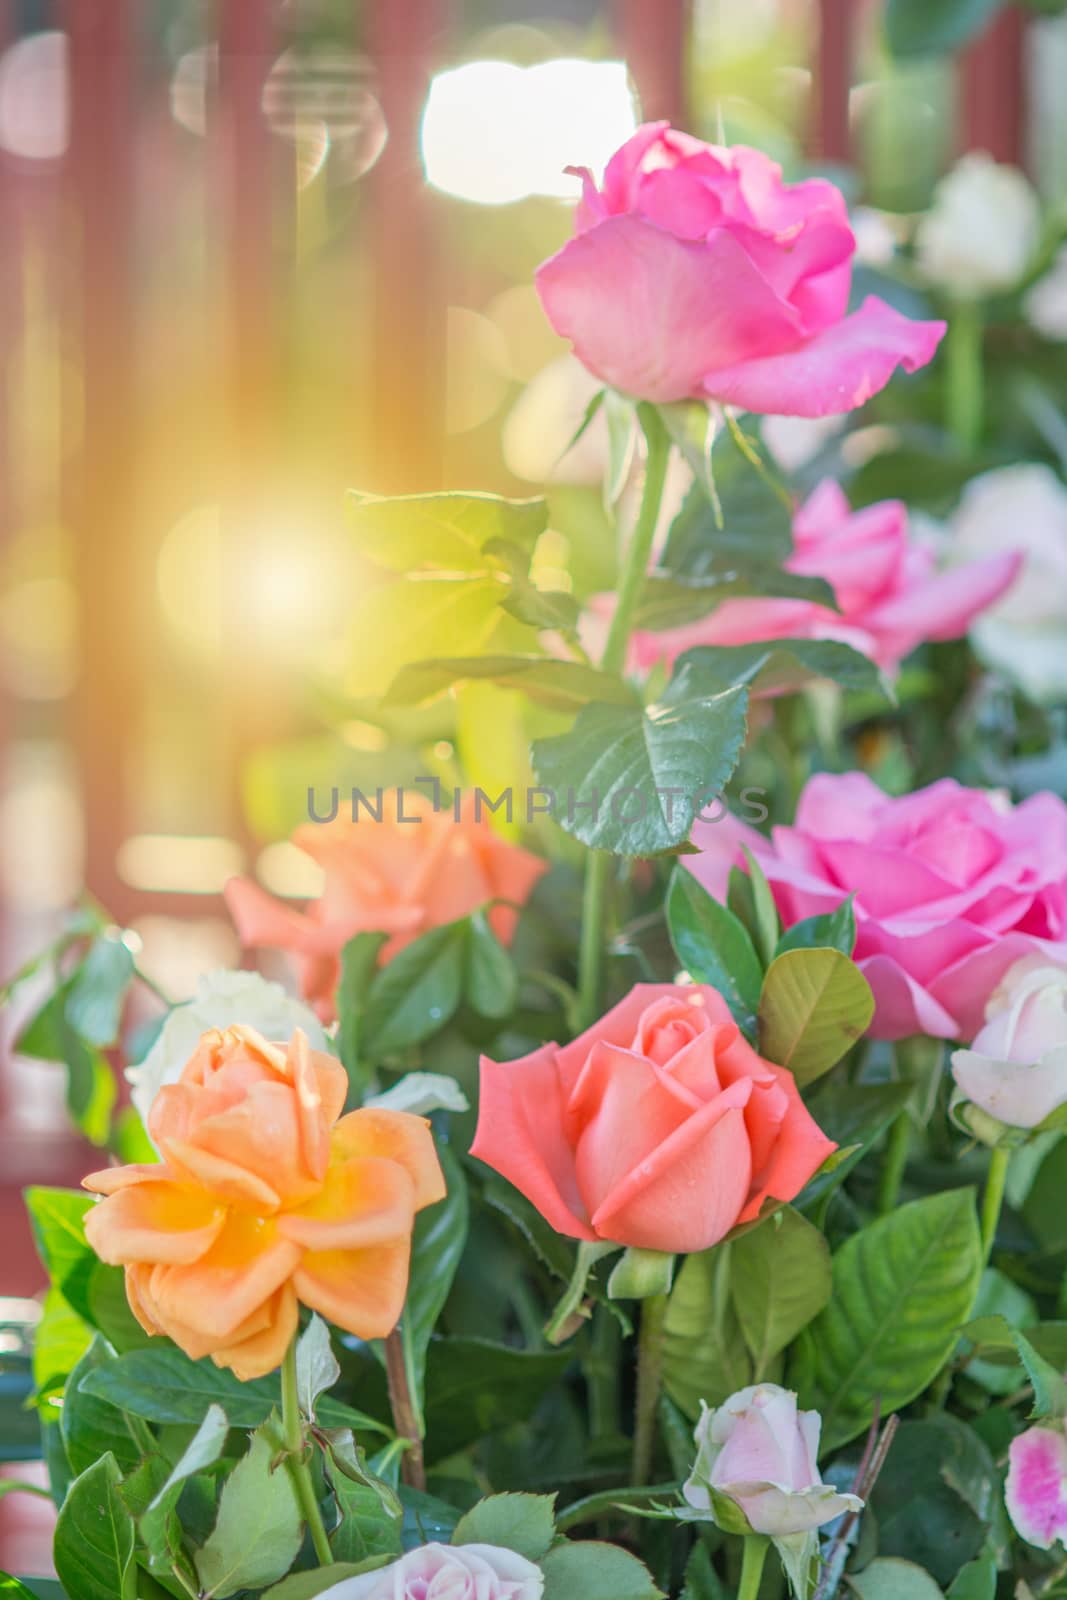 Blurry rose and warm light in garden background , beautiful moments of love and happy life.
